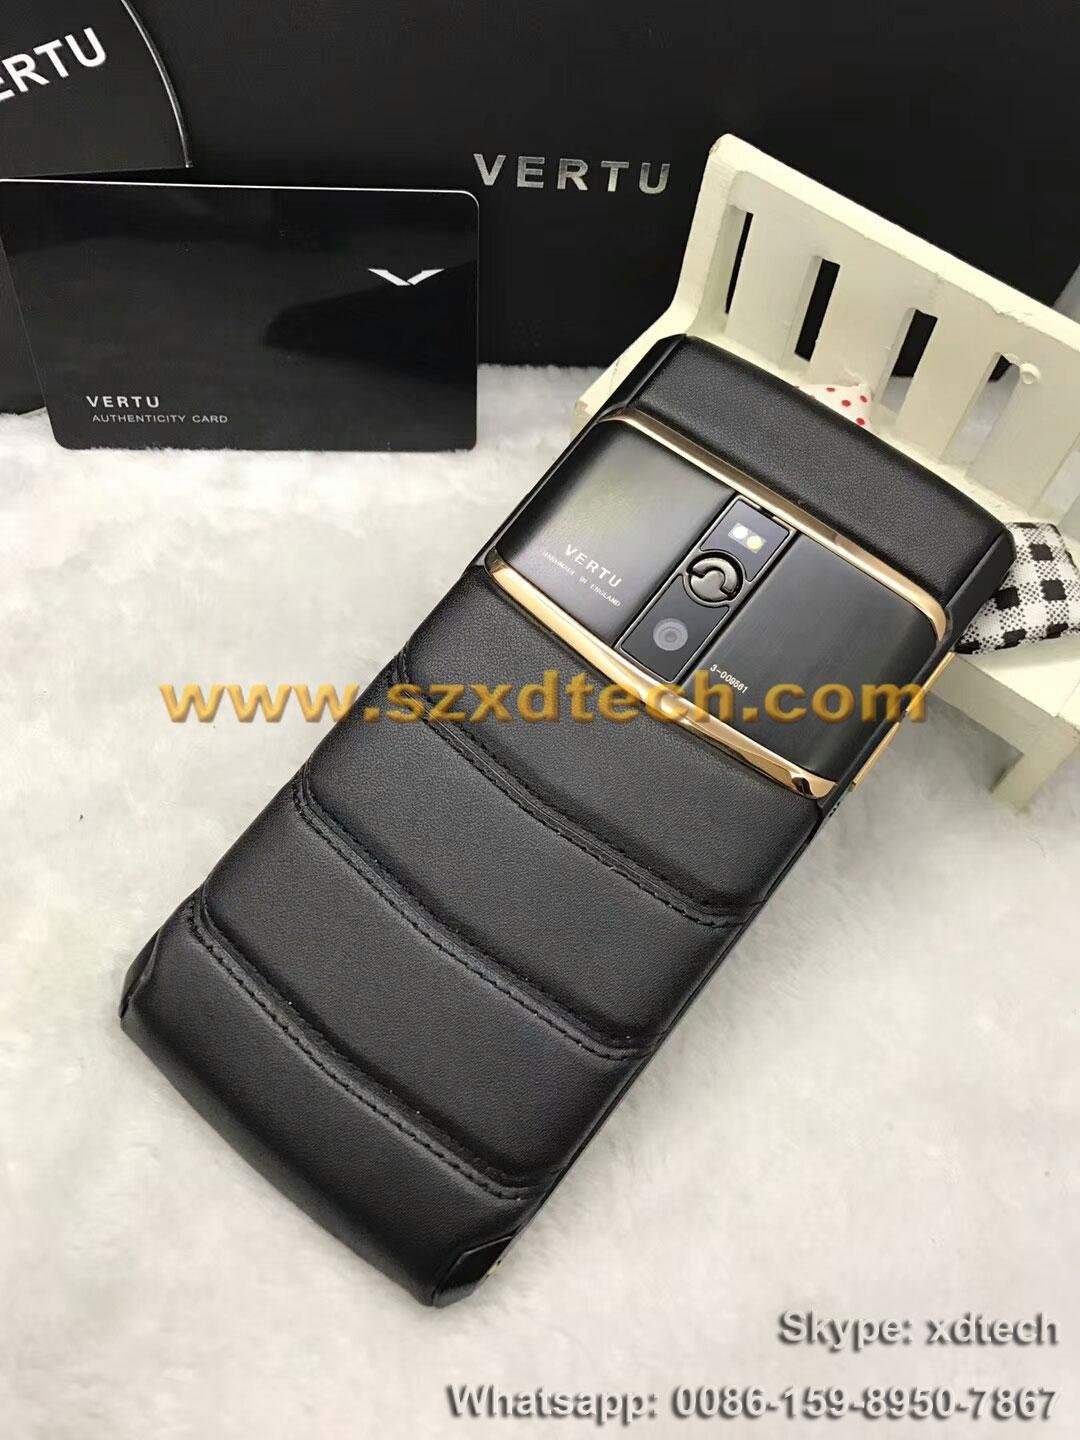 Copy Pure Jet Signature Touch, Vertu Touch, 3+64GB Ti Alloy 4G Sapphire Glass 5